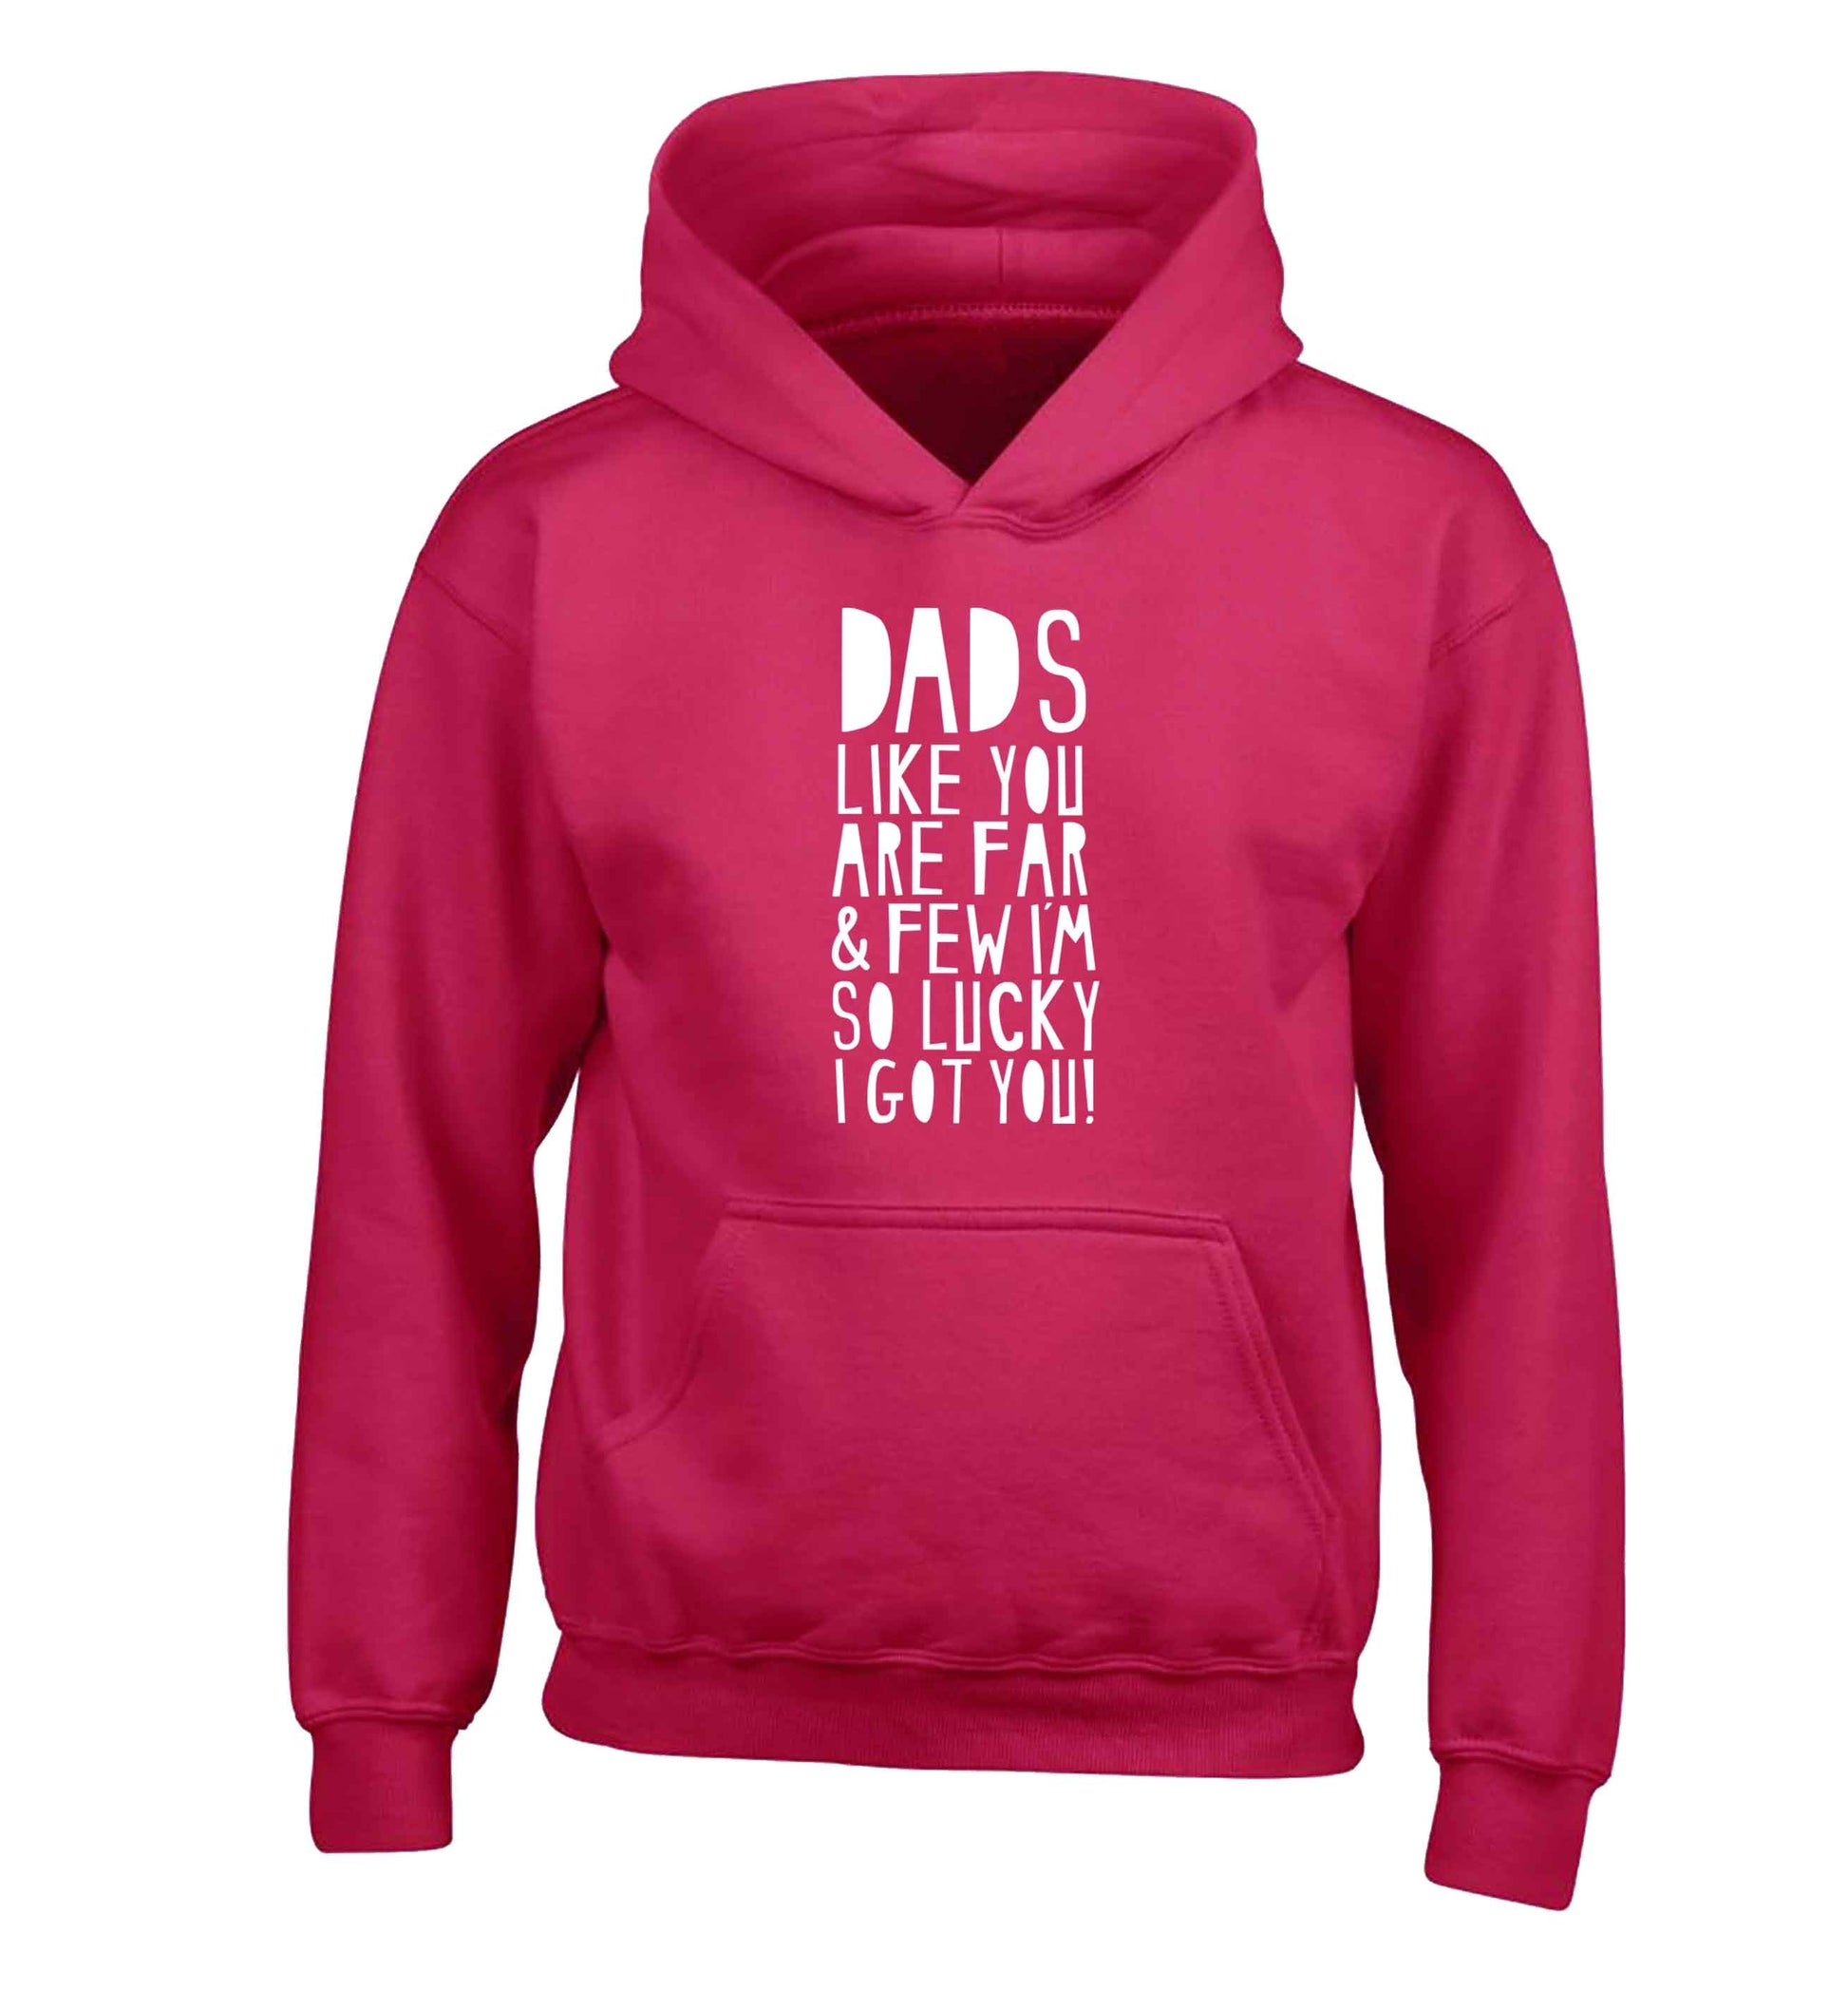 Dads like you are far and few I'm so luck I got you! children's pink hoodie 12-13 Years